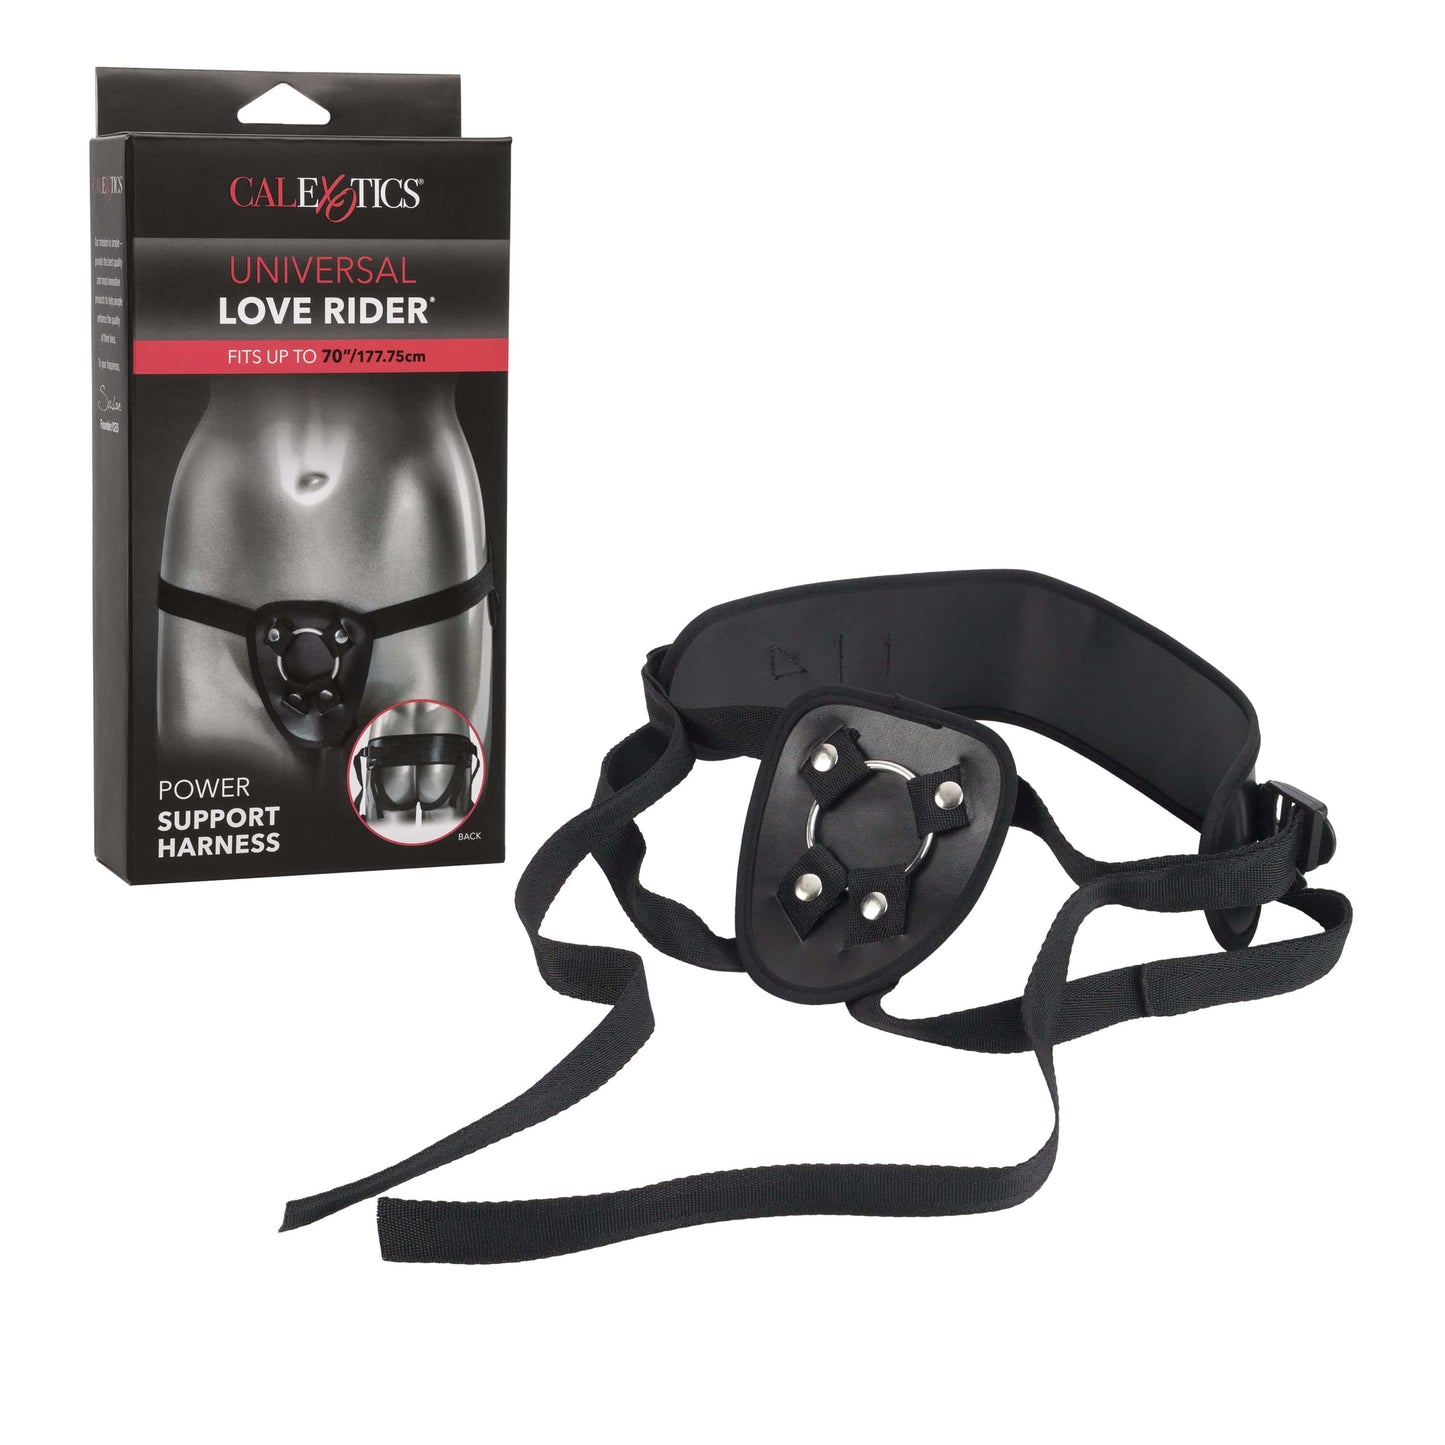 Universal Love Rider Power Support Harness - Thorn & Feather Sex Toy Canada